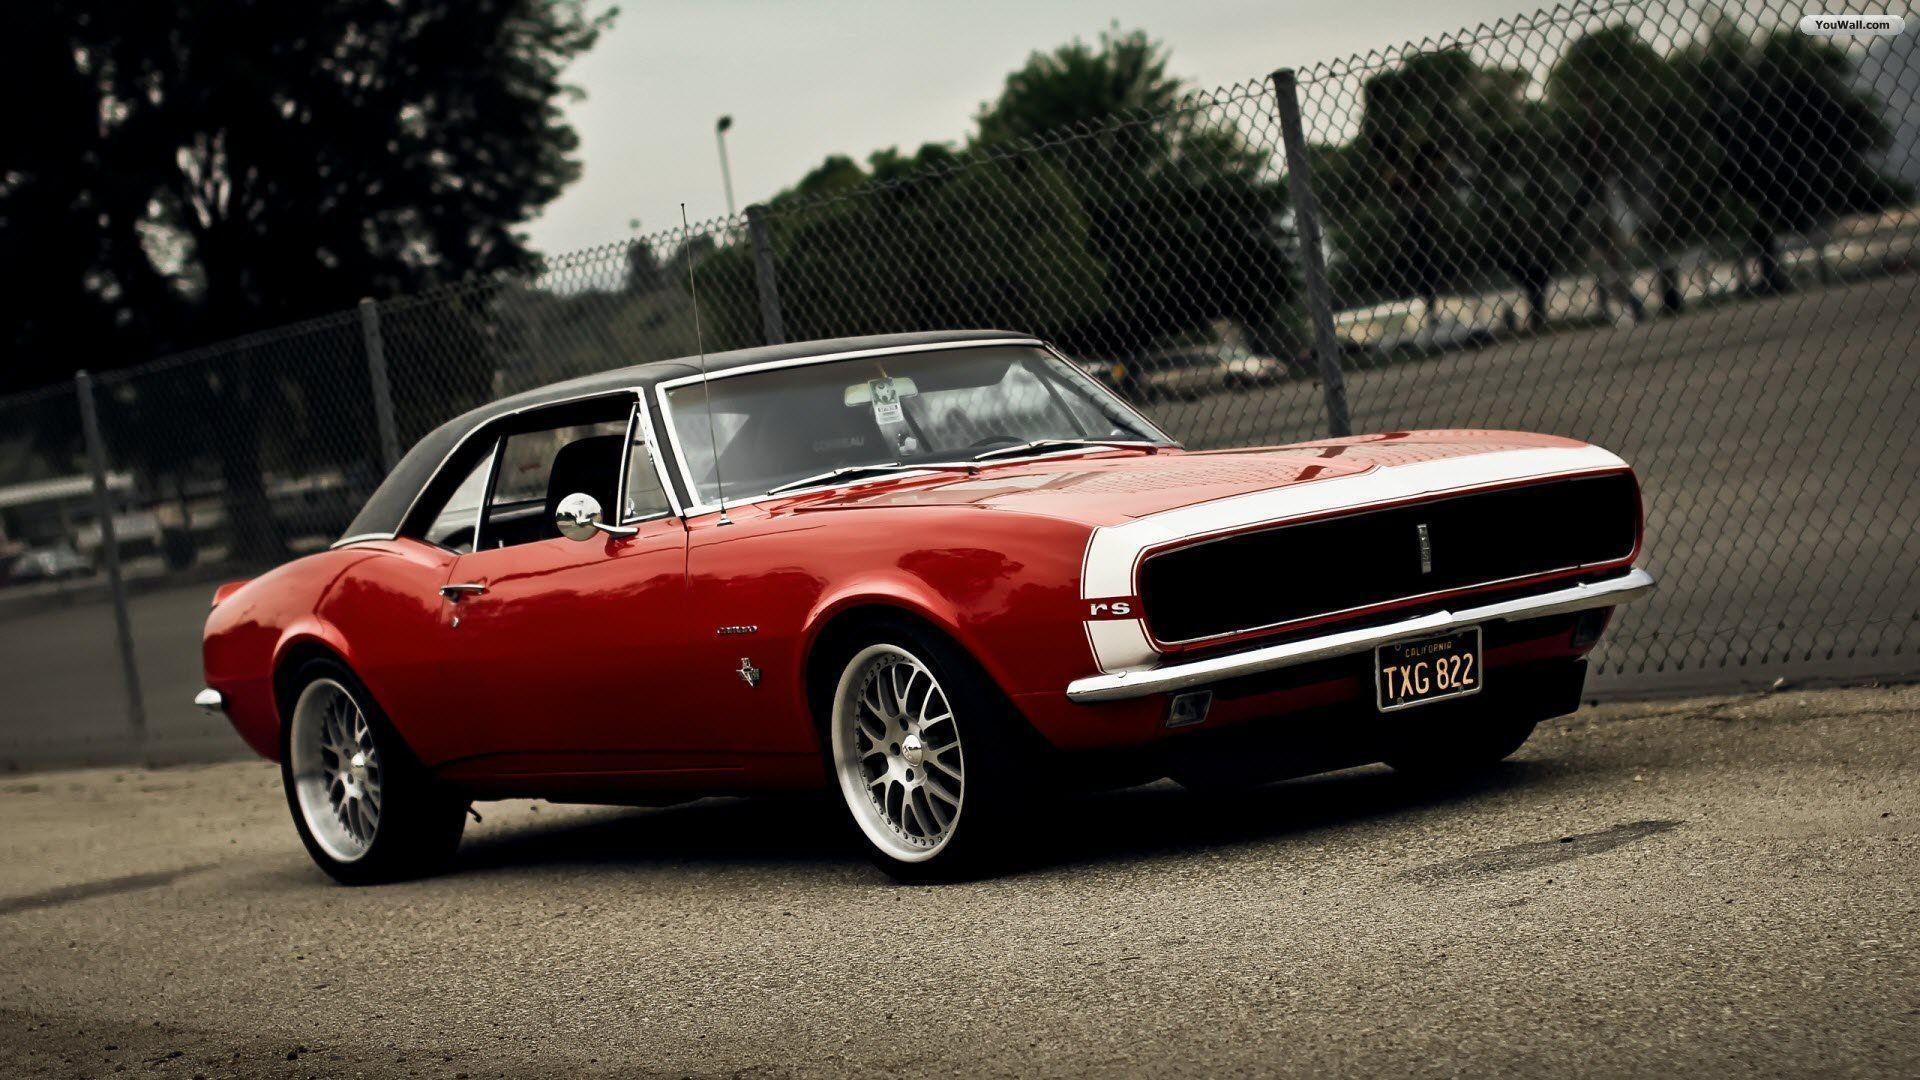 AmazingPict.com. Red Muscle Car Wallpaper High Resolution